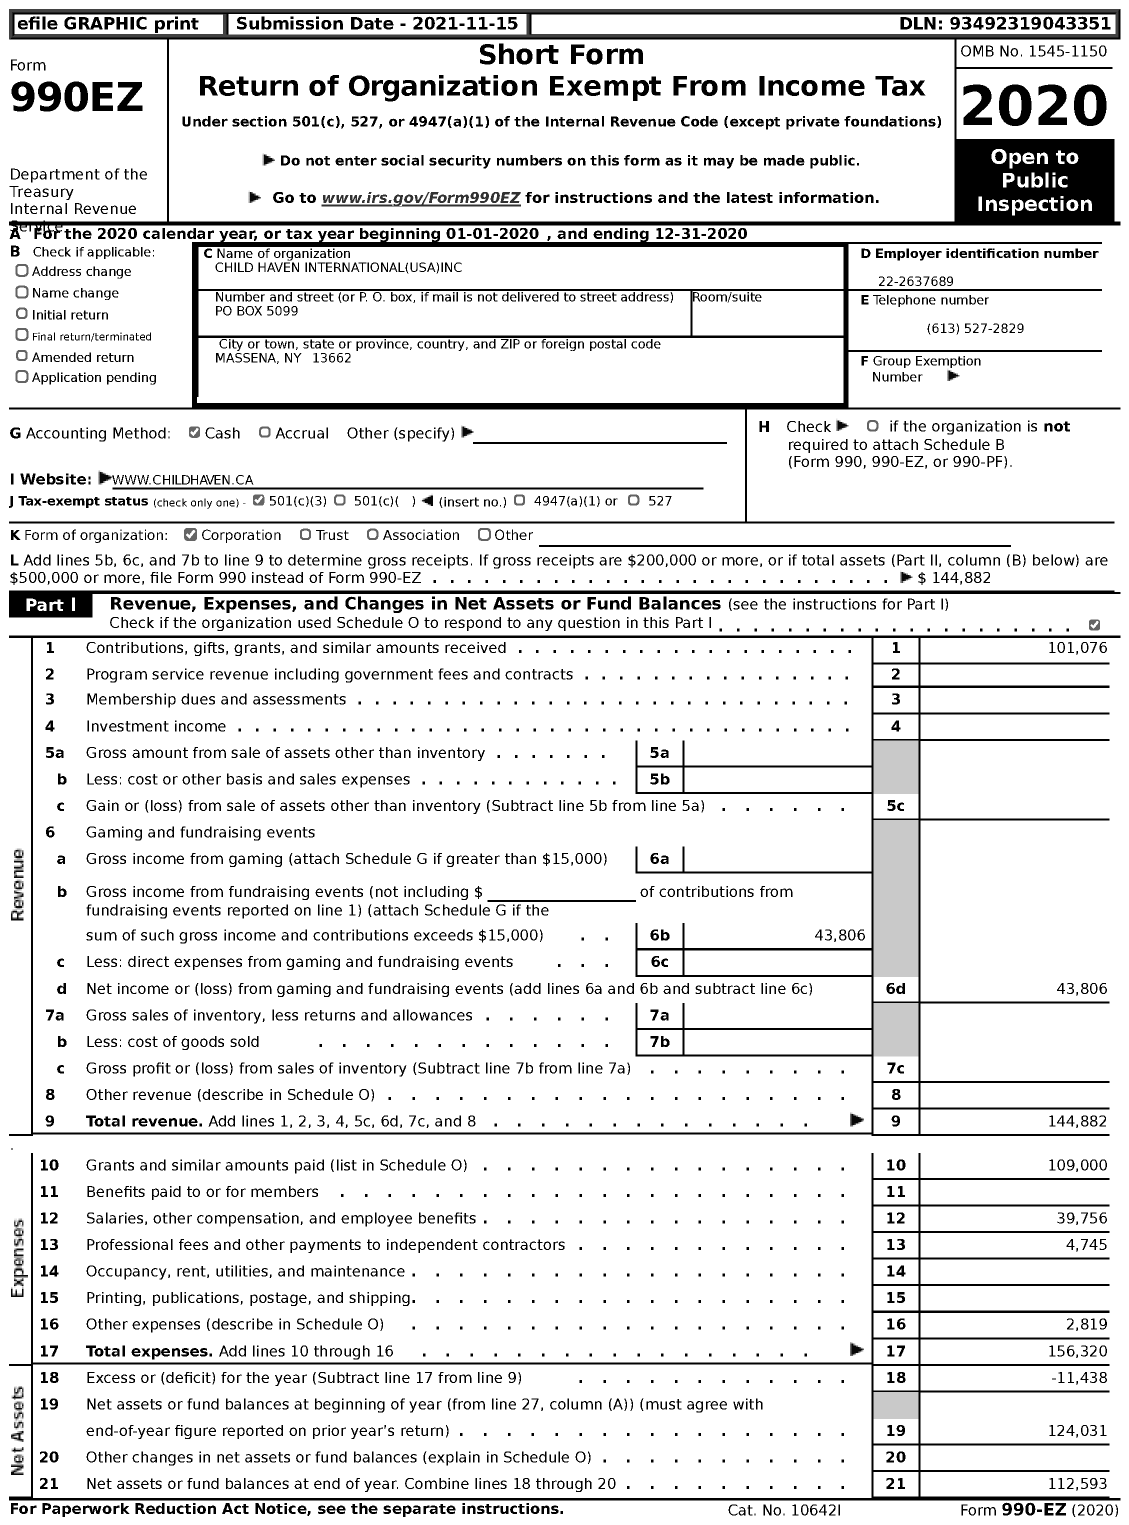 Image of first page of 2020 Form 990EZ for Child Haven International